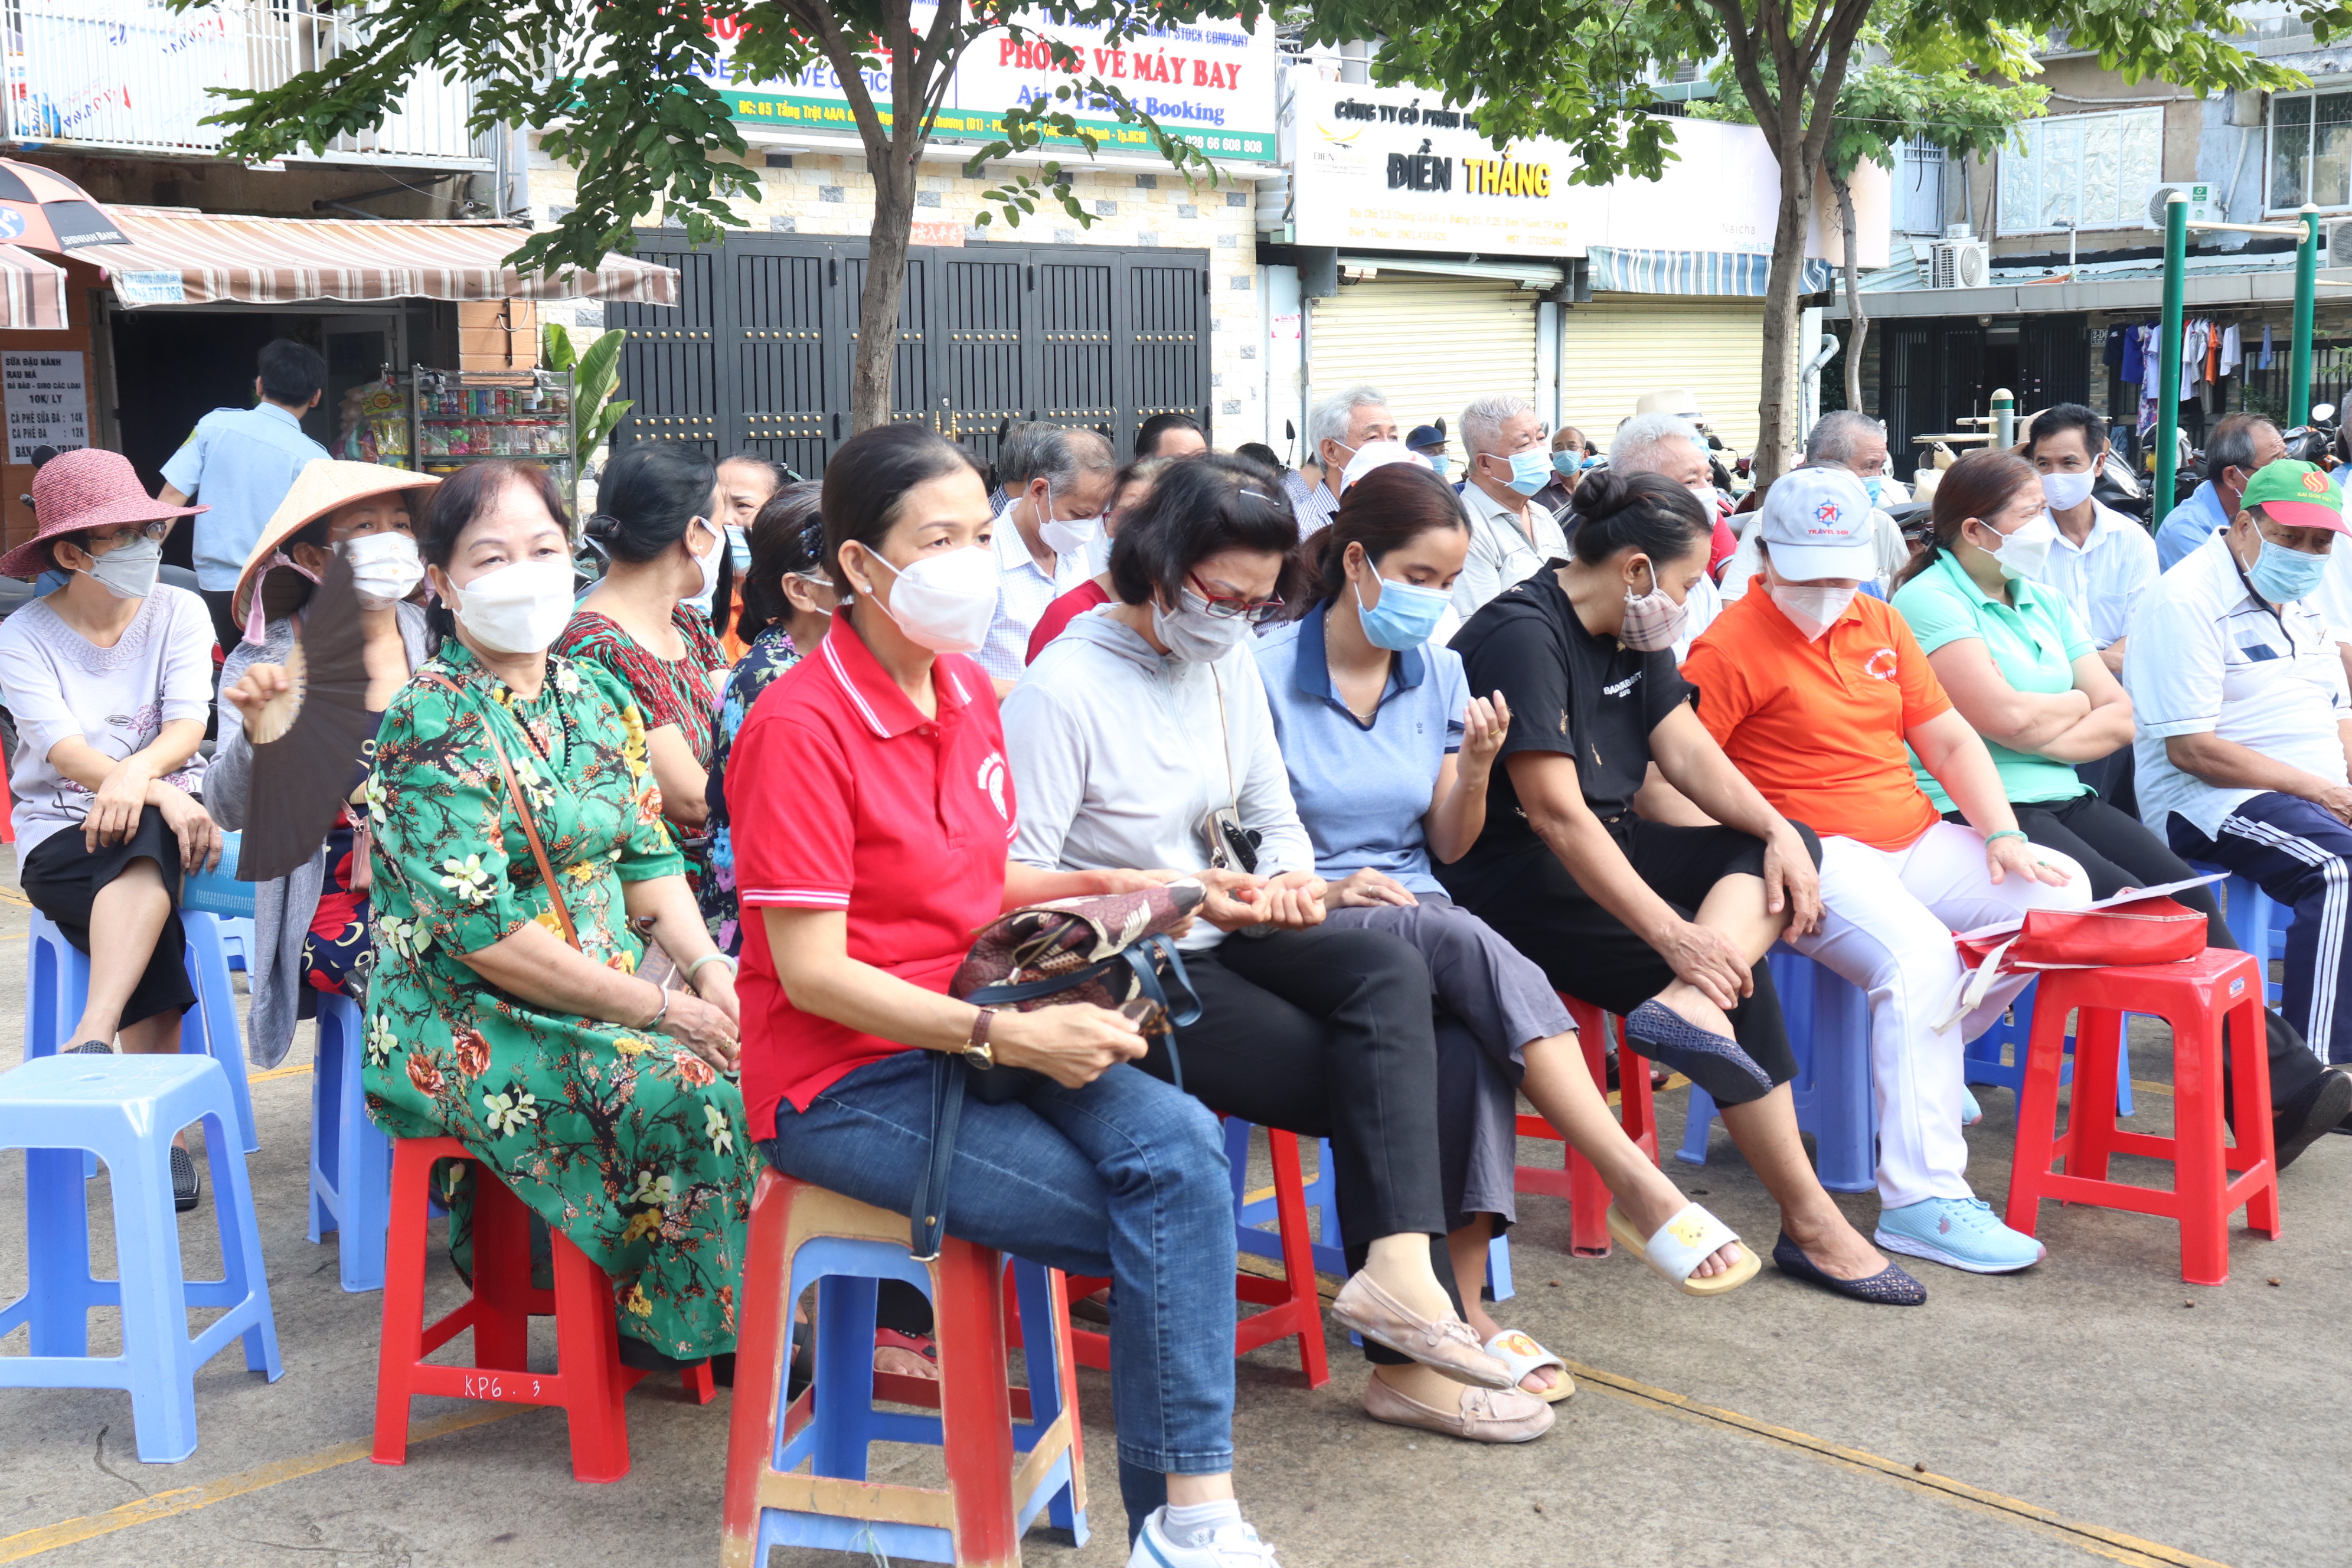 Over 98% of Ho Chi Minh City residents have COVID-19 antibodies: survey